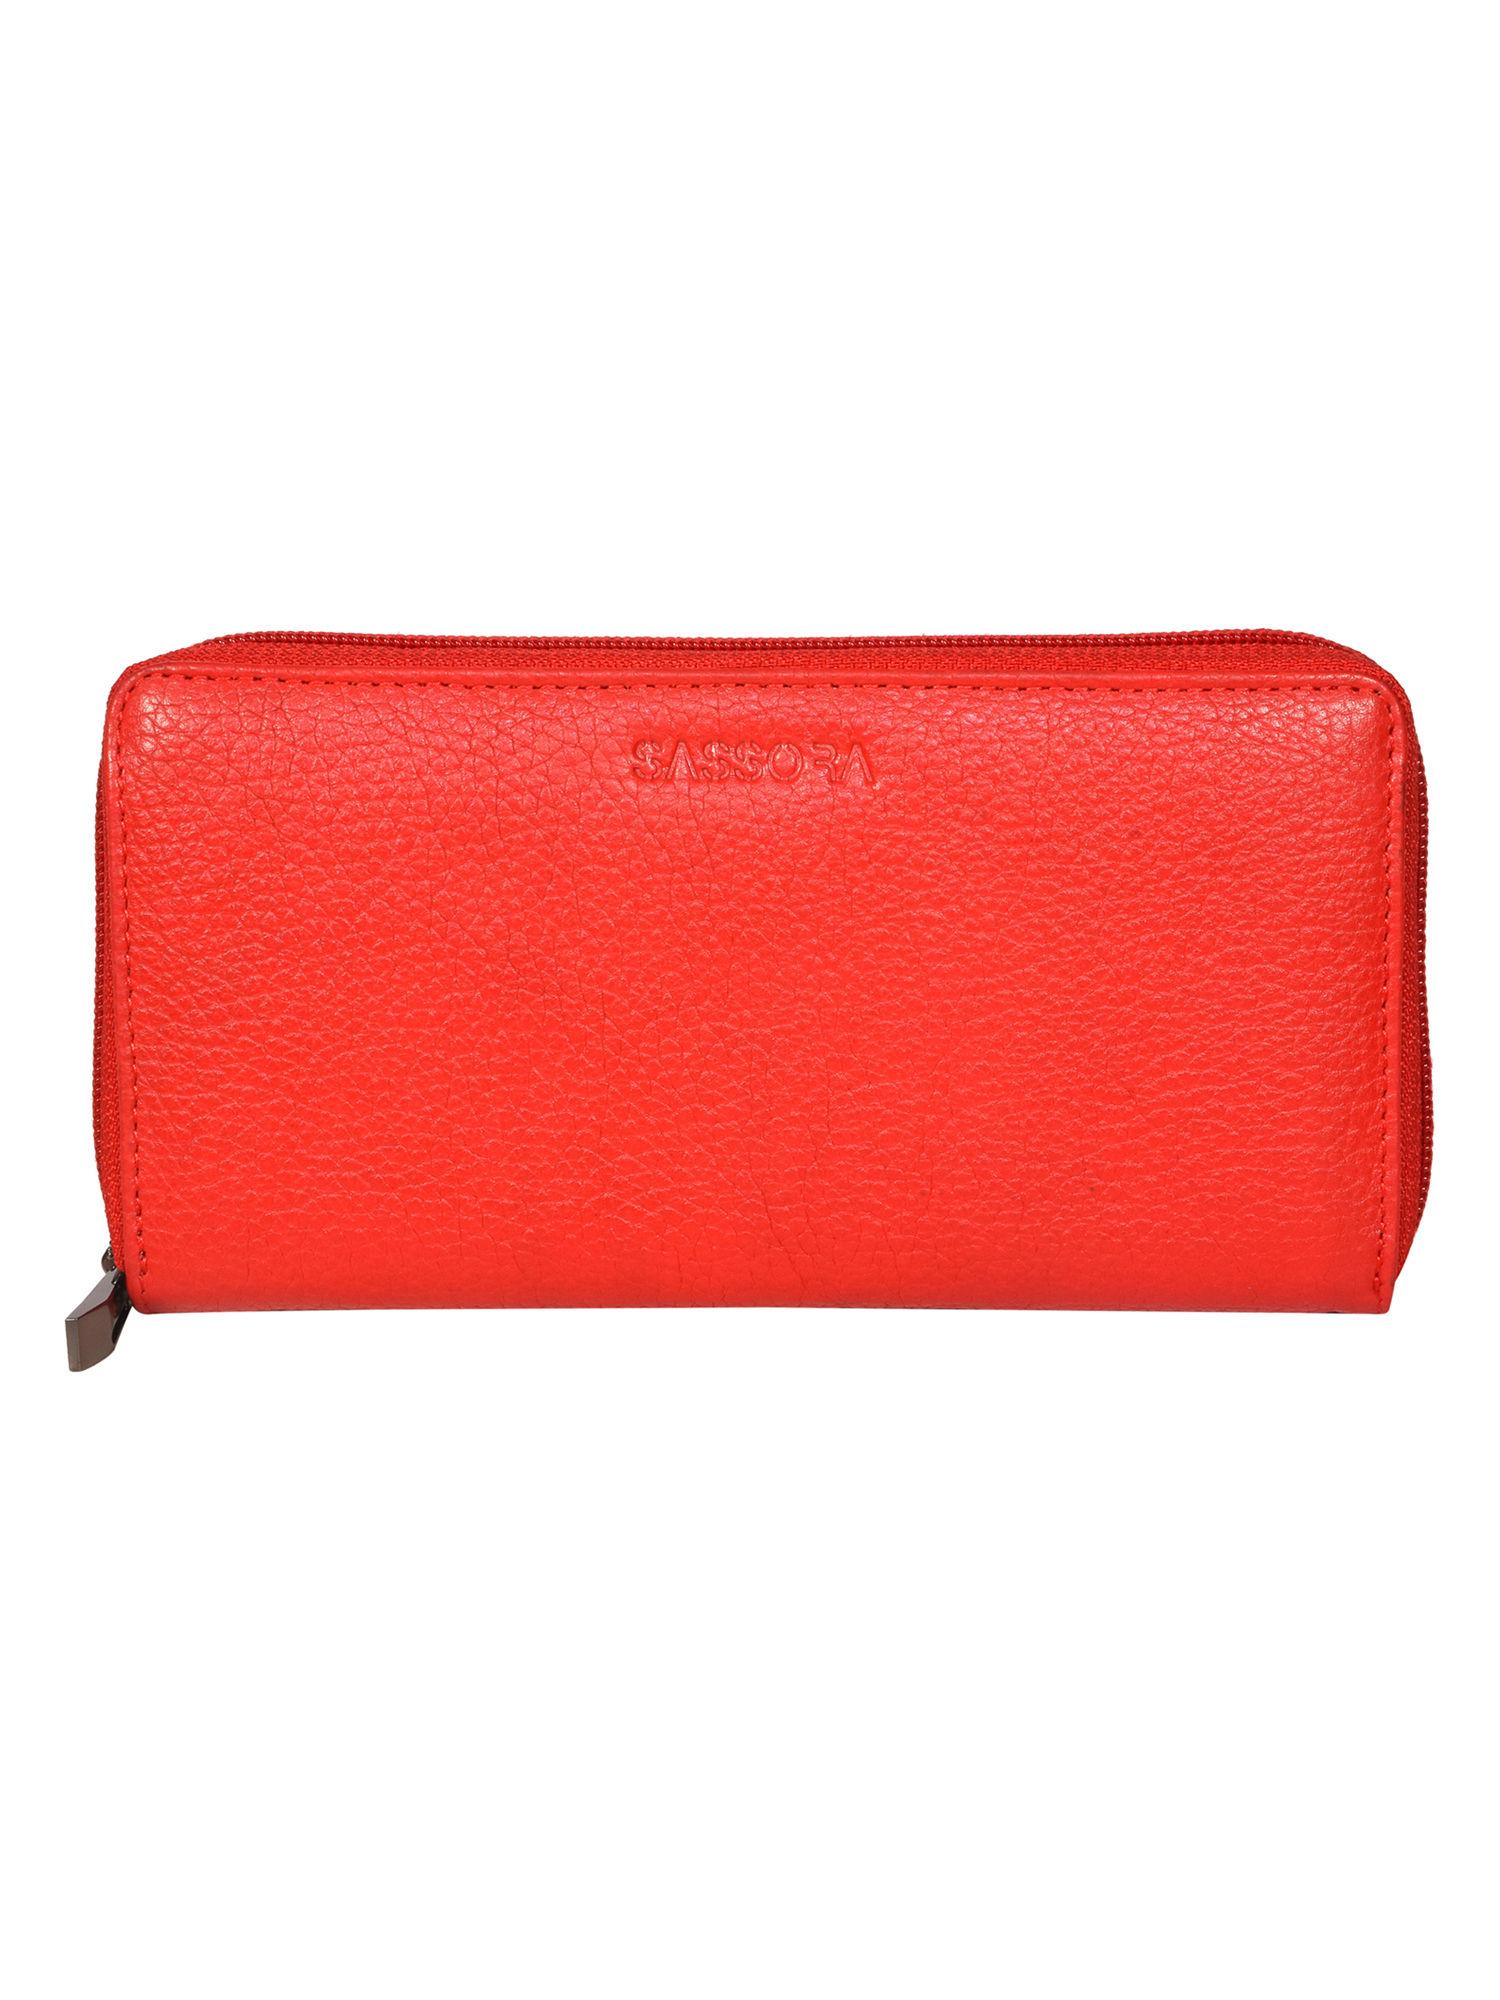 genuine leather women red rfid everyday use wallet (m)